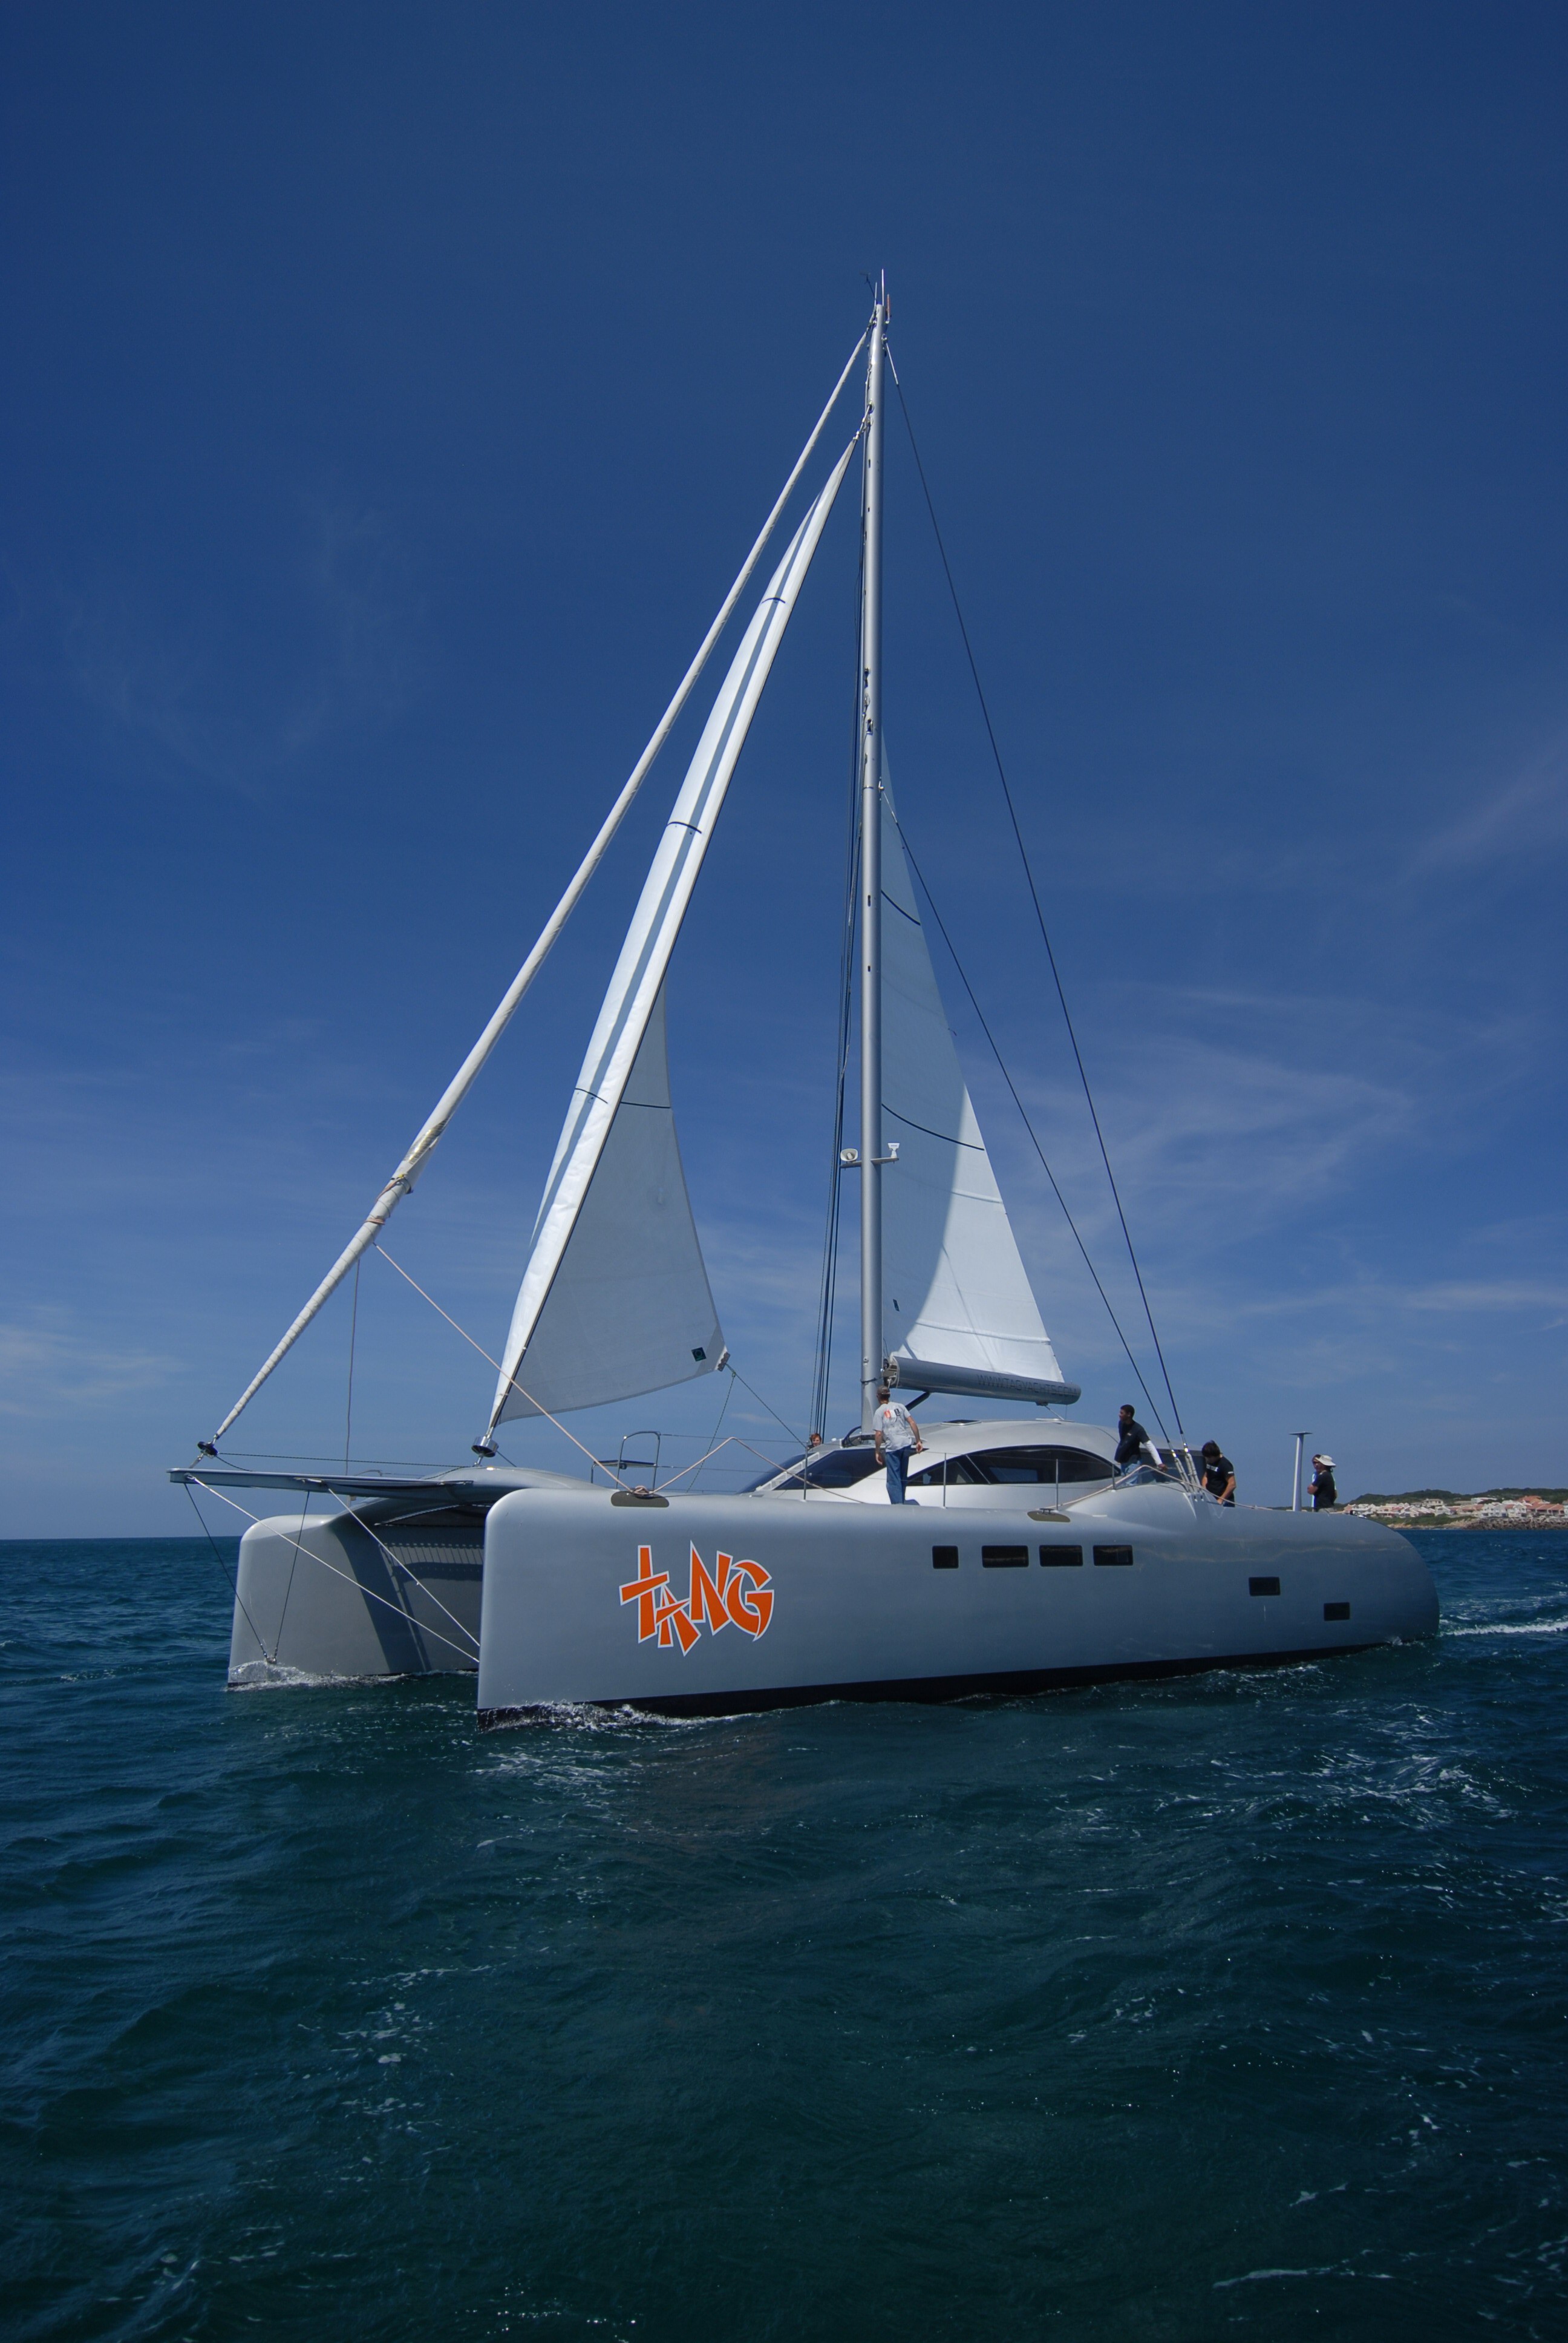 New 144 V Air Conditioning System Keeps Hybrid-Powered Sailboats Cool, Quiet And Diesel-Free!